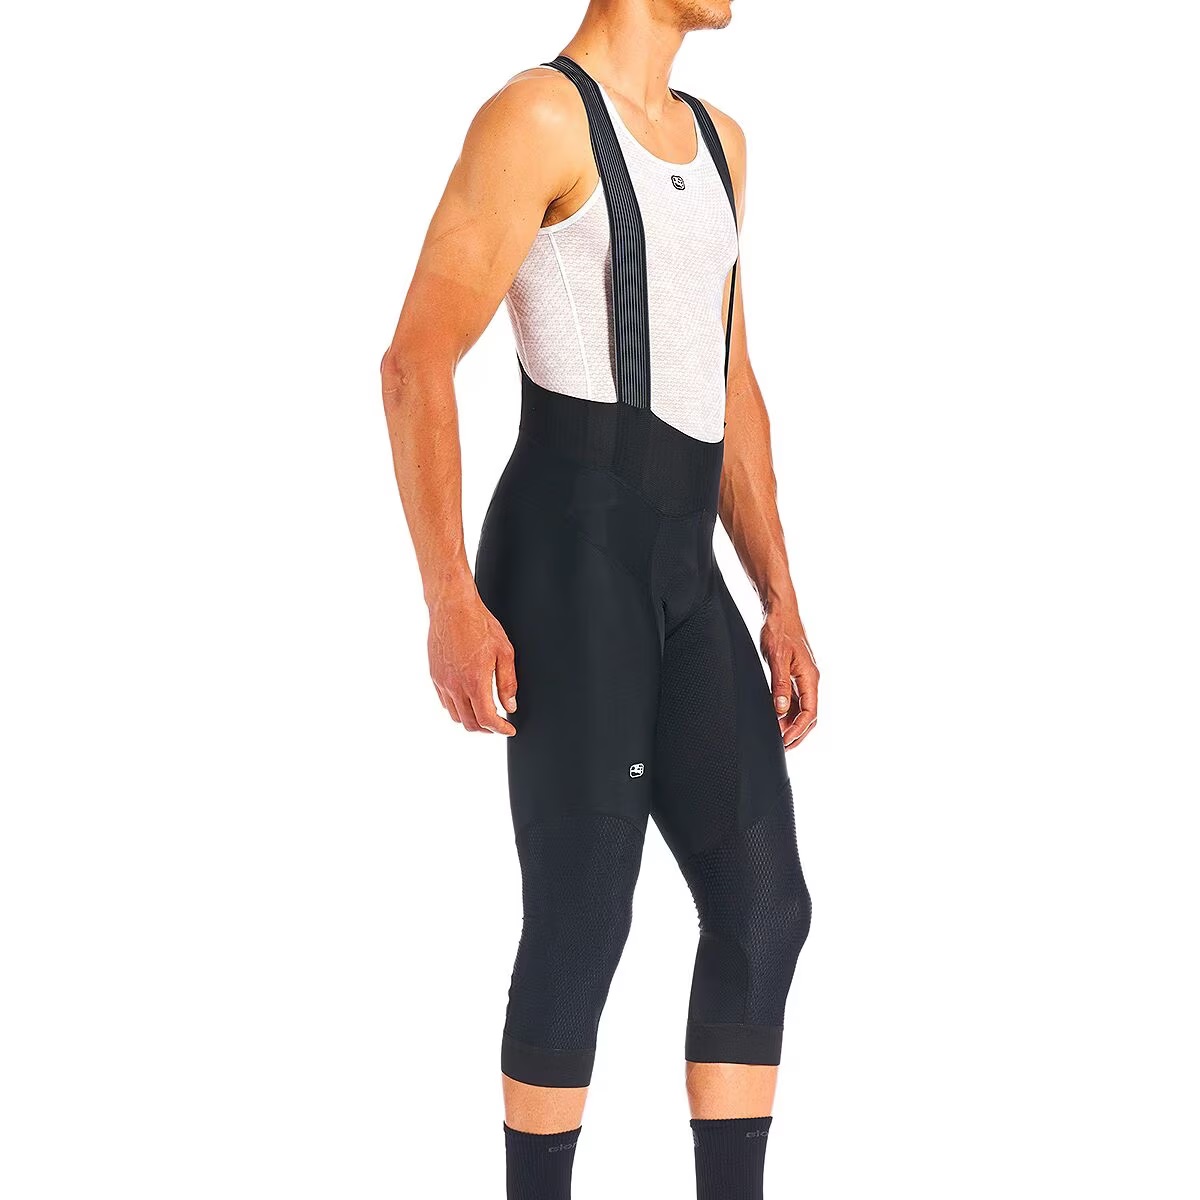 Giordana FR-C Pro bib knickers, available at Lakeside Bicycles.